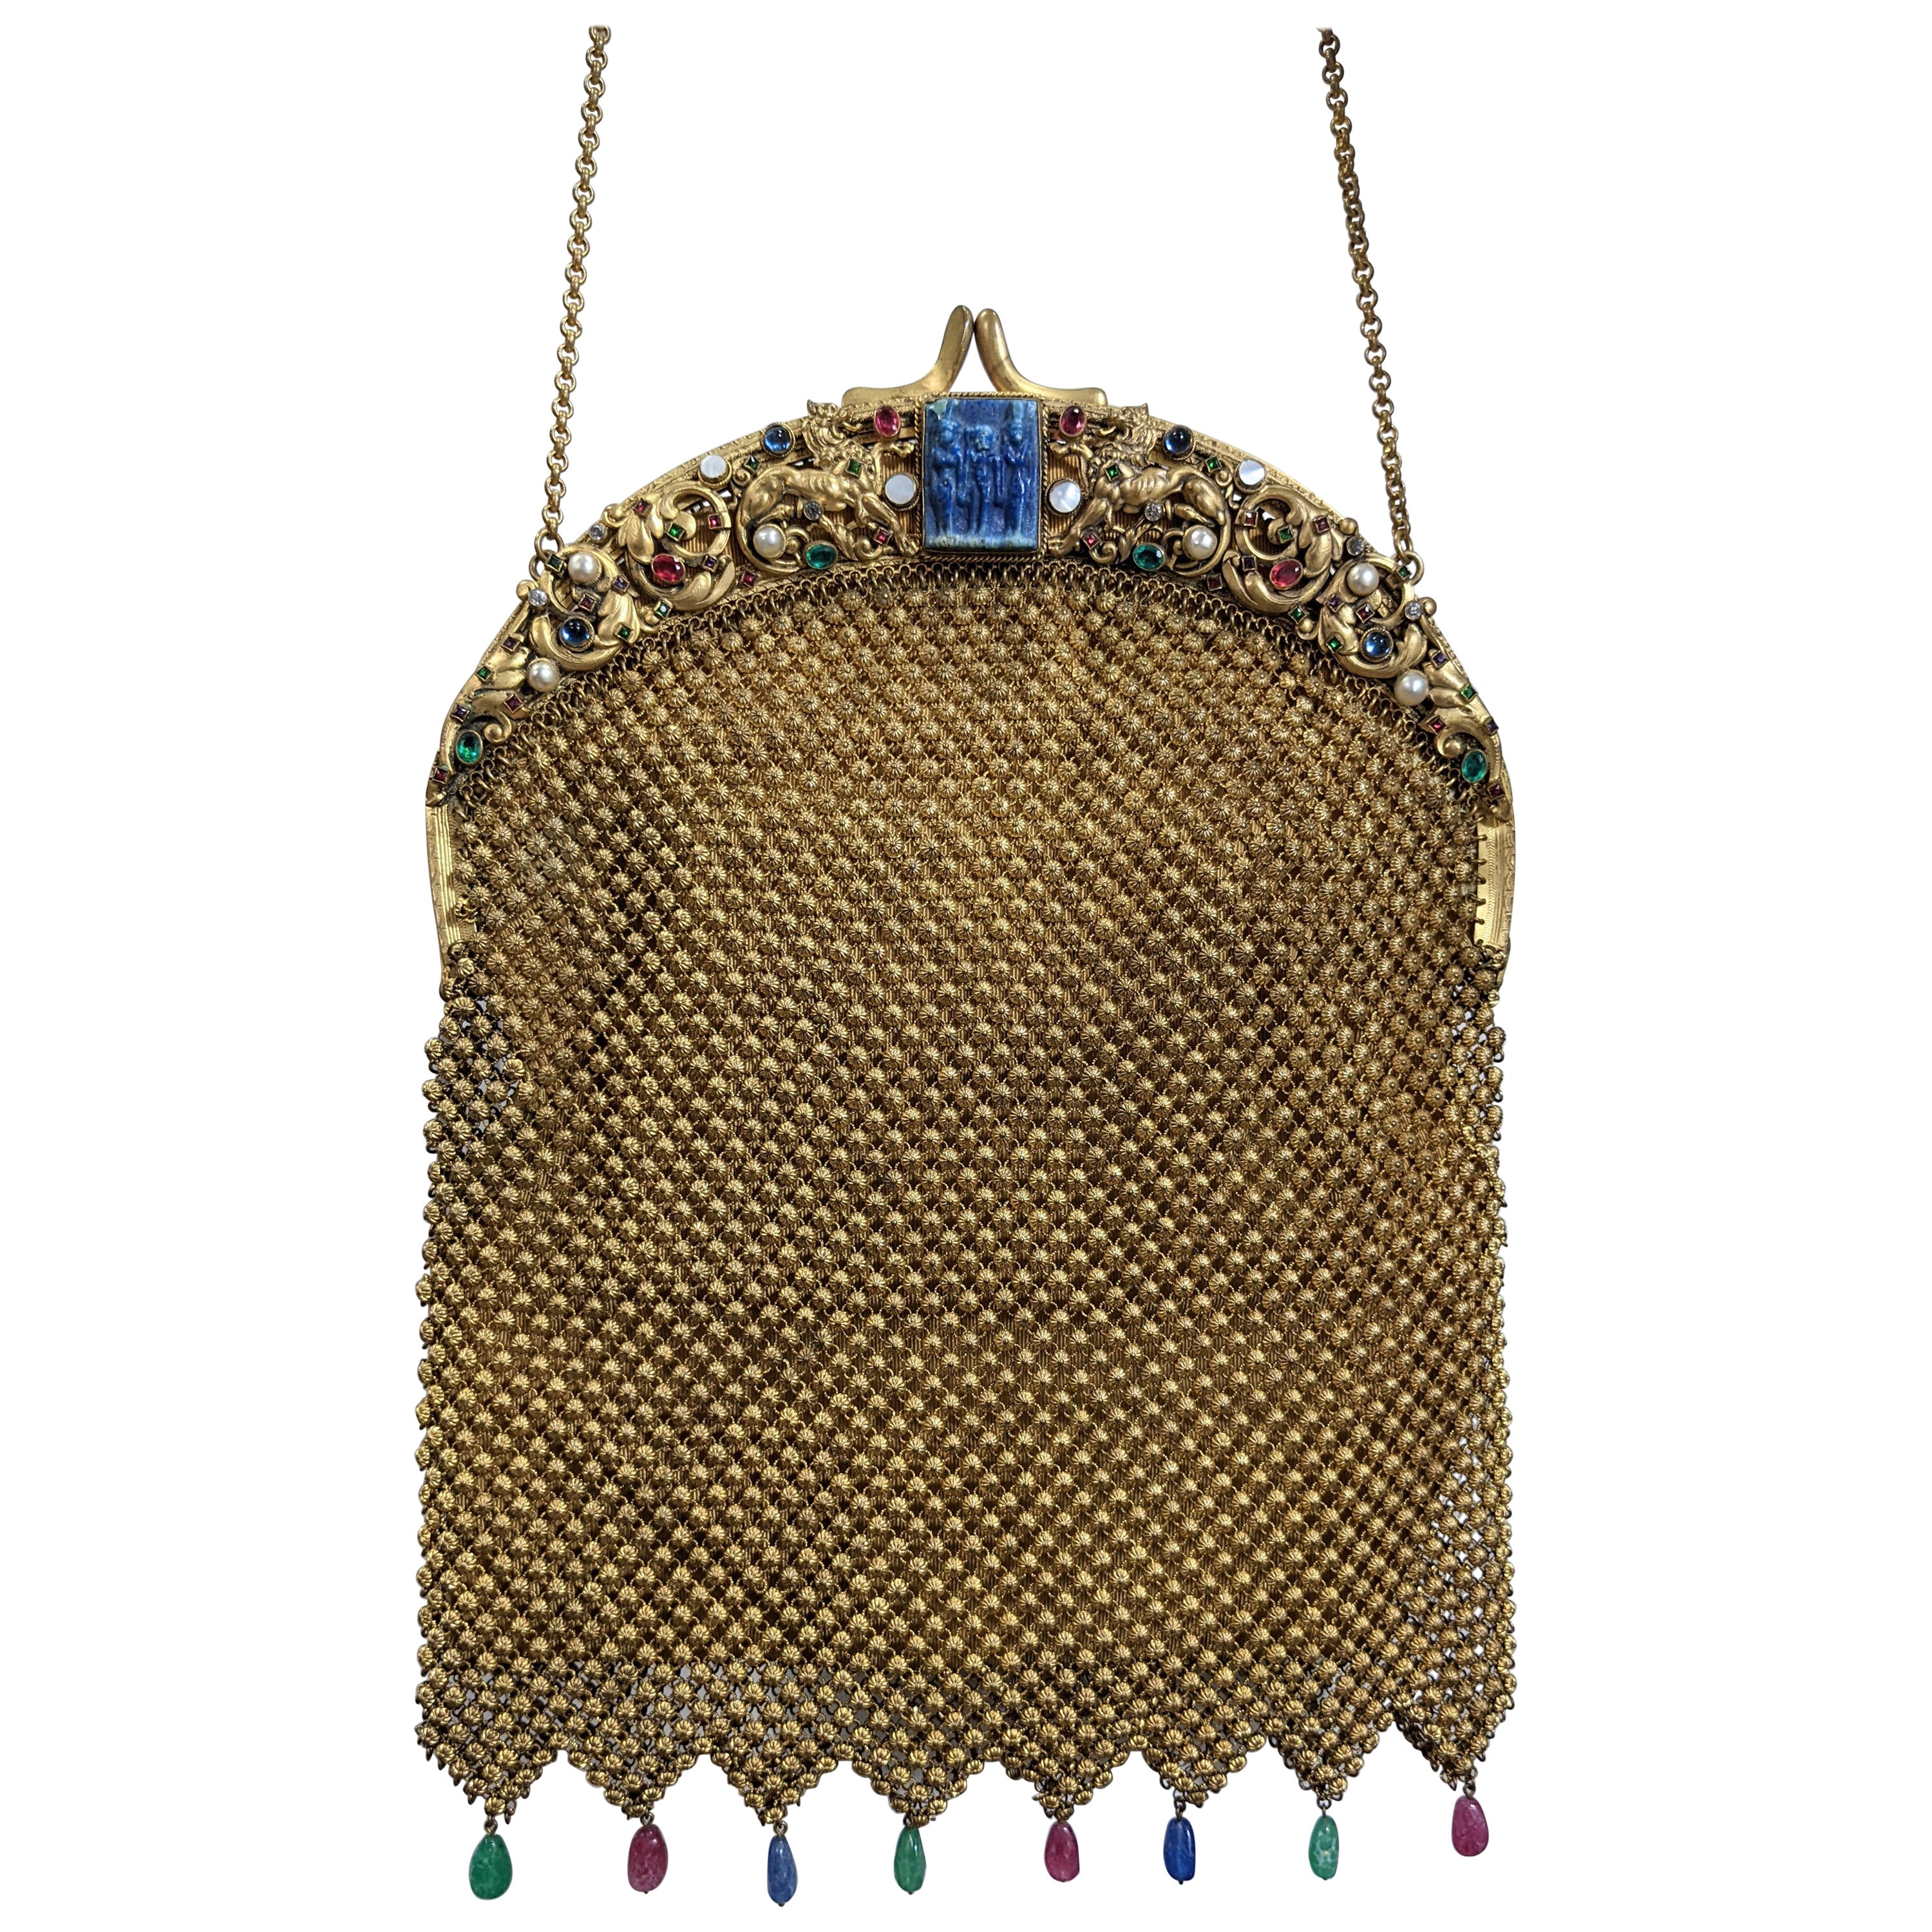 Exceptional 1920's Czech Egyptian Revival Jeweled Mesh Purse